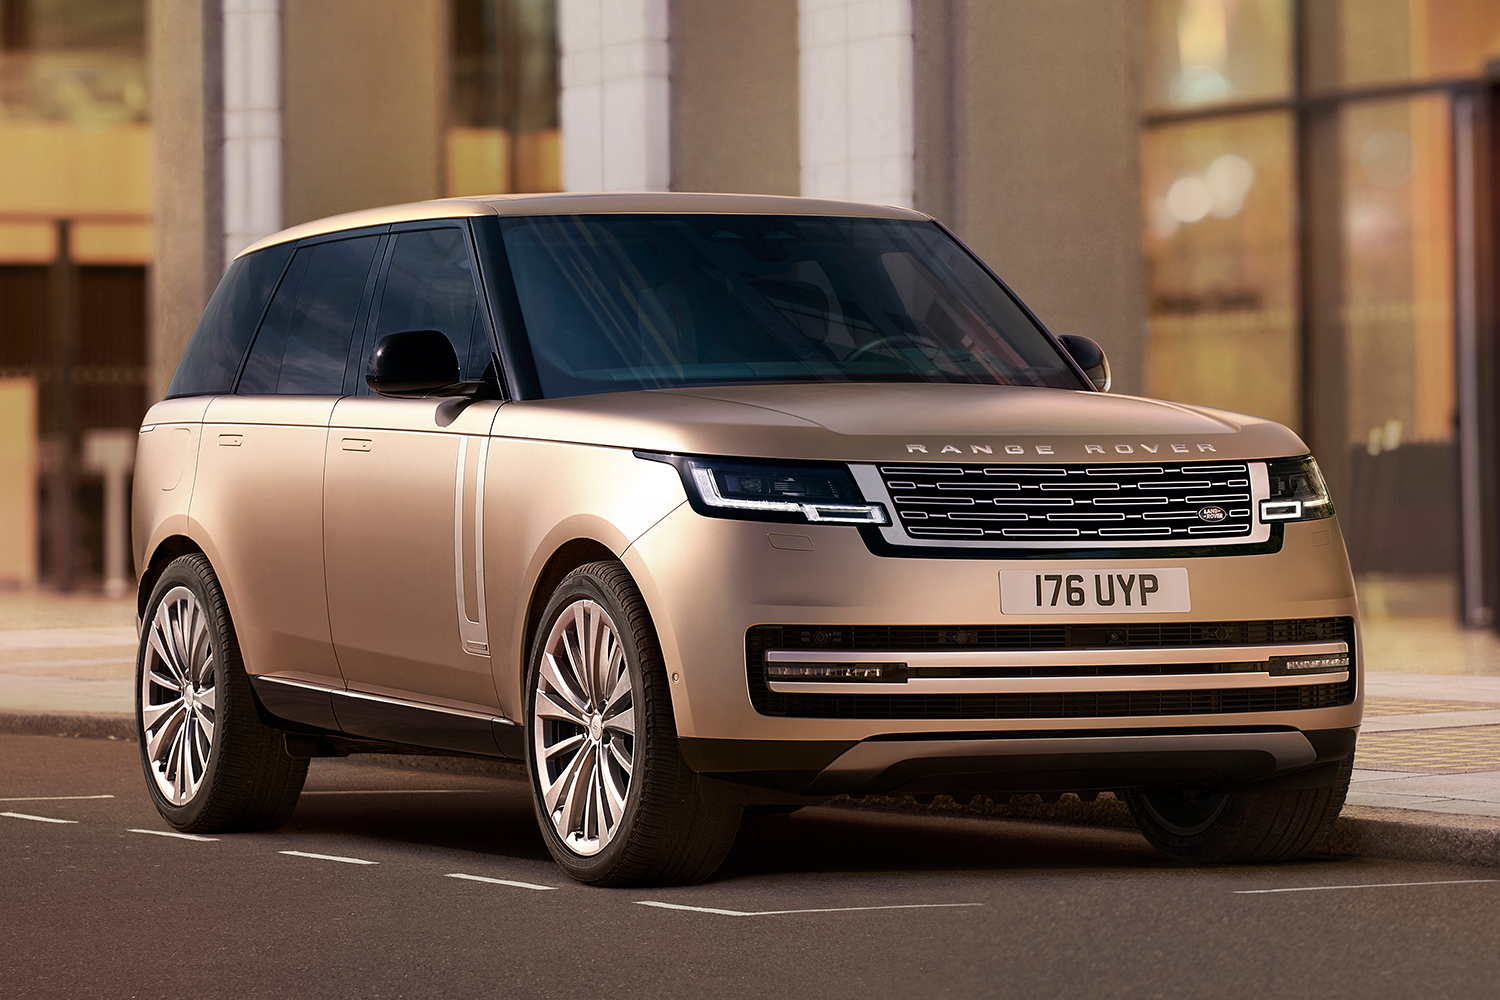 The new 2022 Range Rover, the fifth-generation of the luxury SUV, sitting still on a street